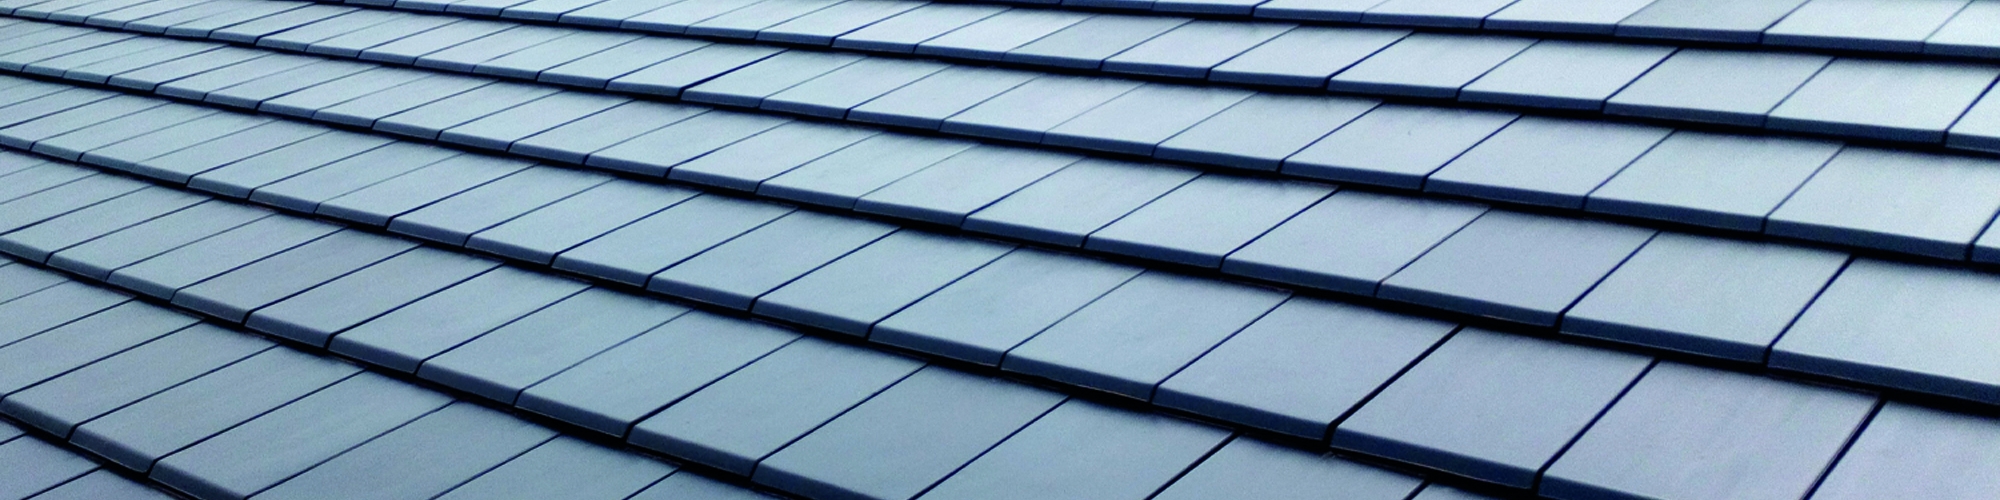 lbs roofing tile, clay tiles, slate effect tile, boden roofing